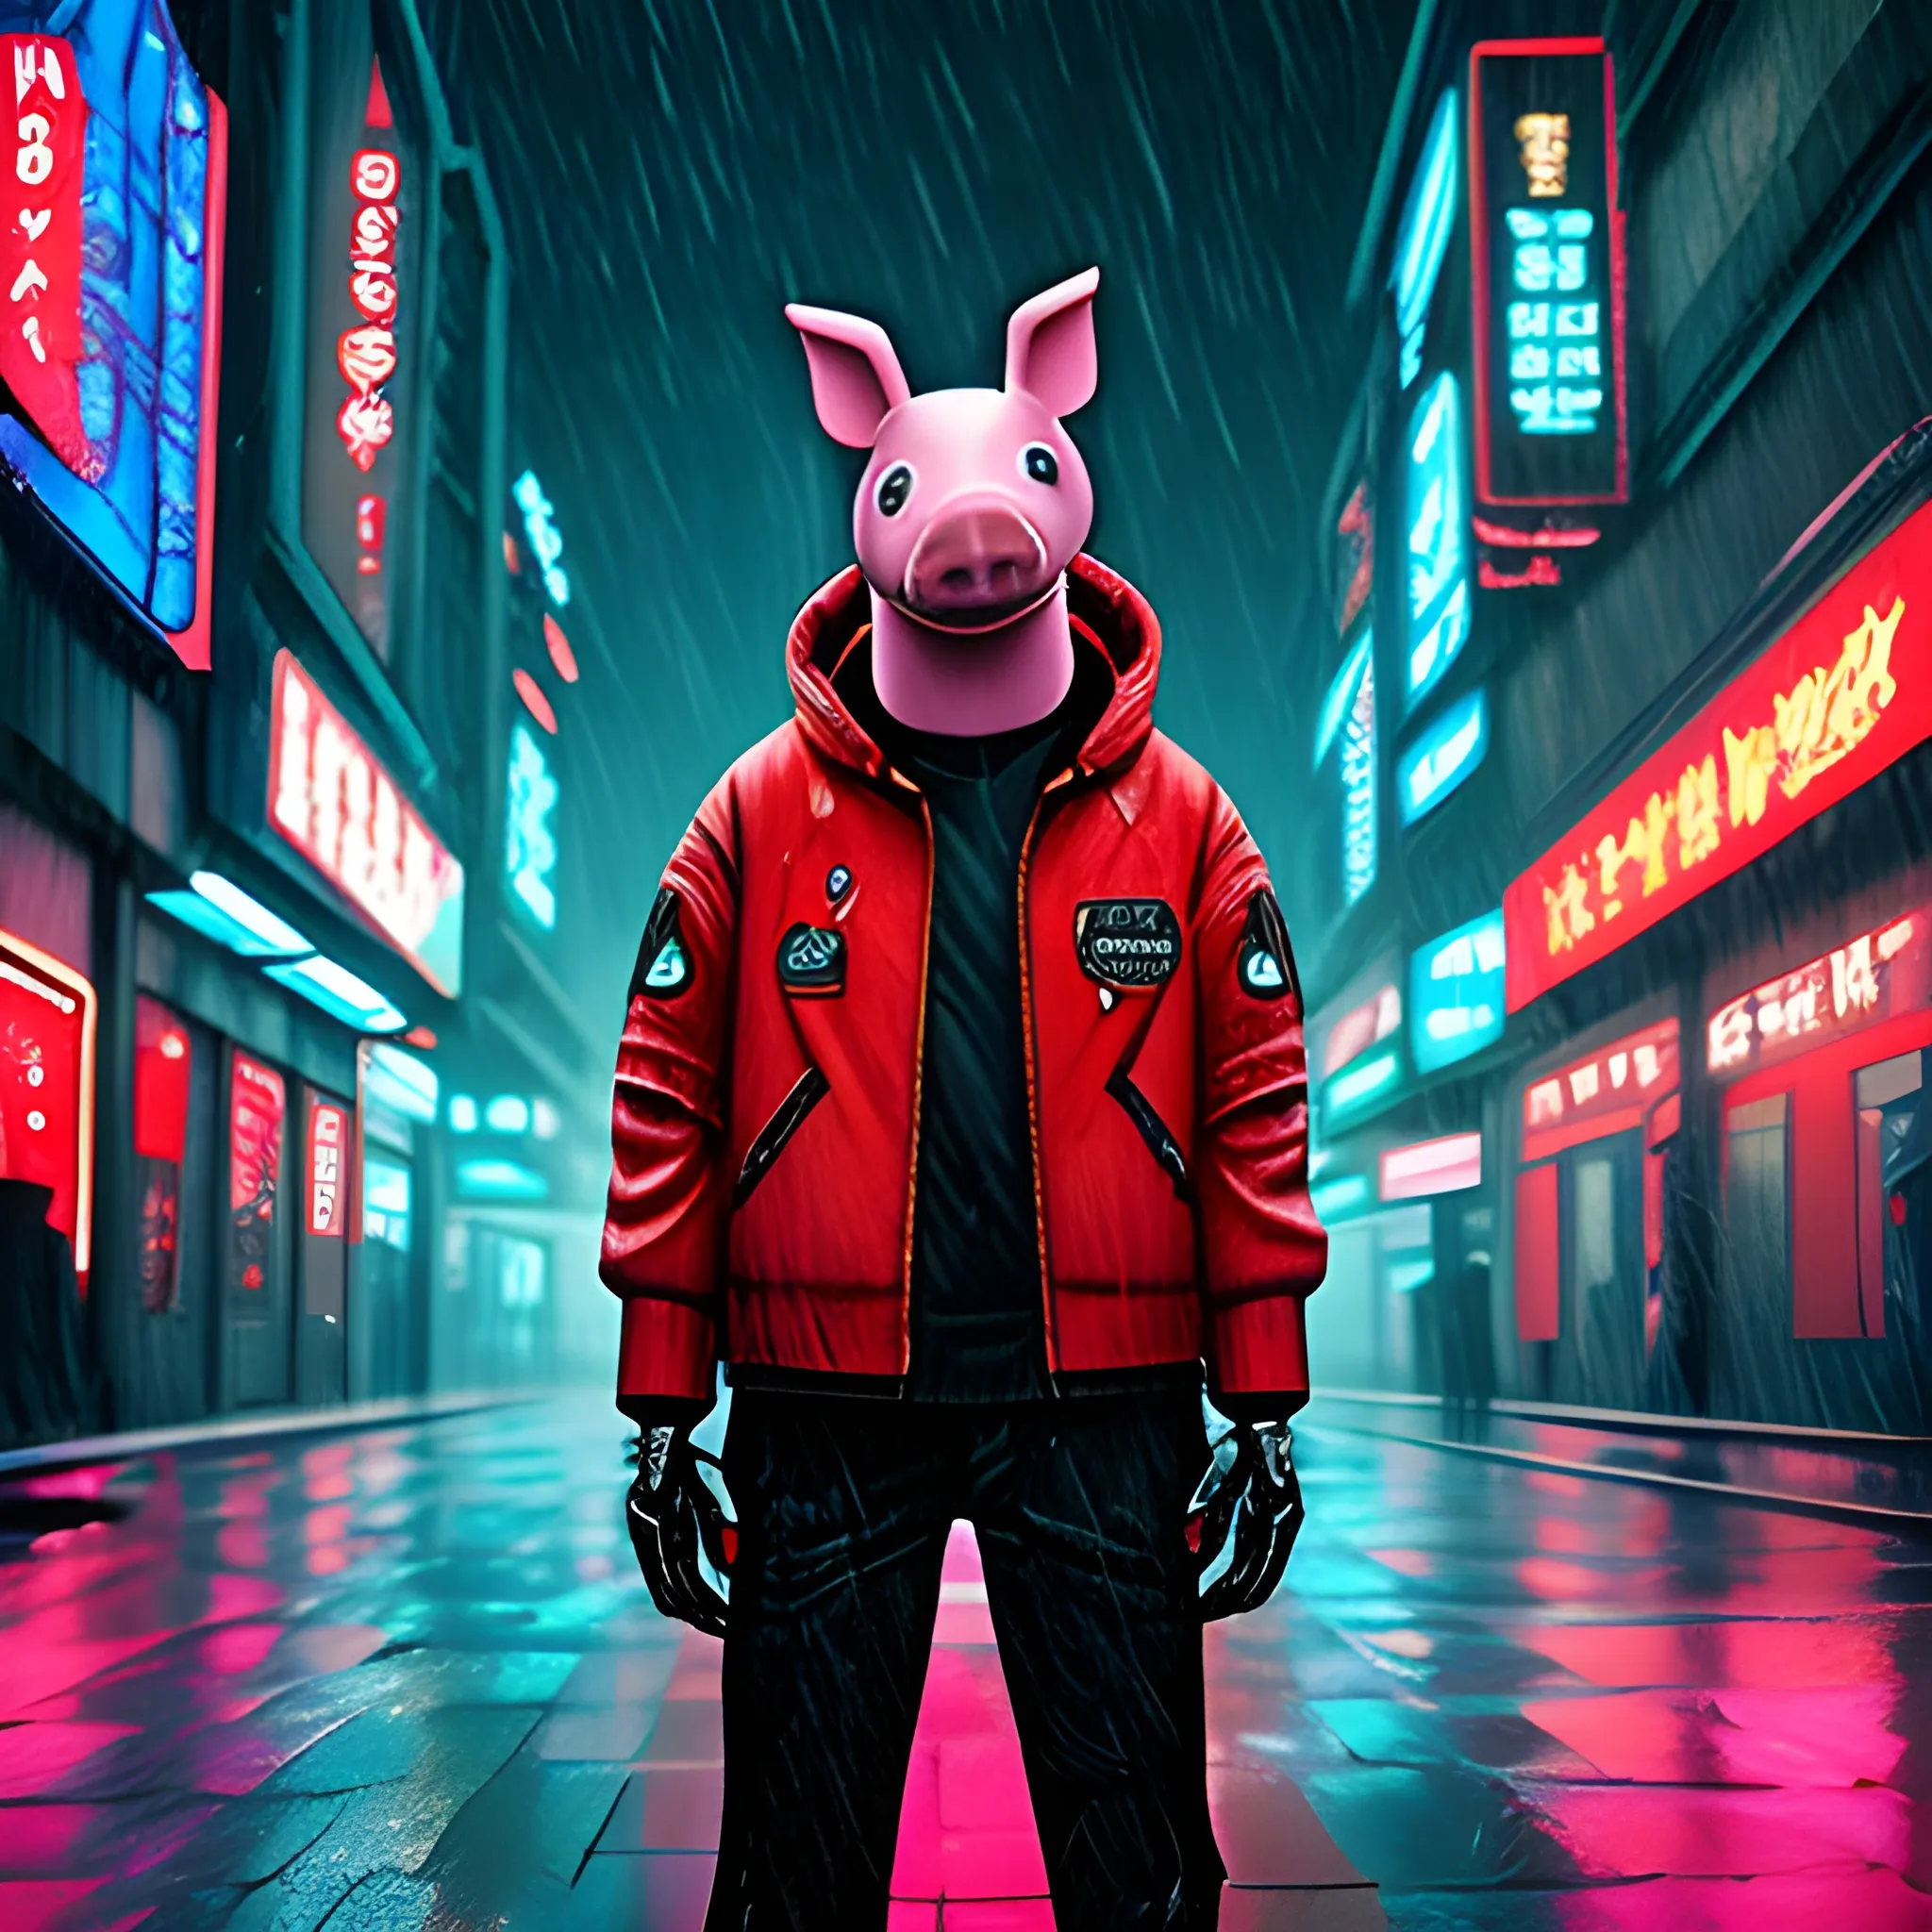 Robot pig in space city, cyberpunk, red jacket in the rain